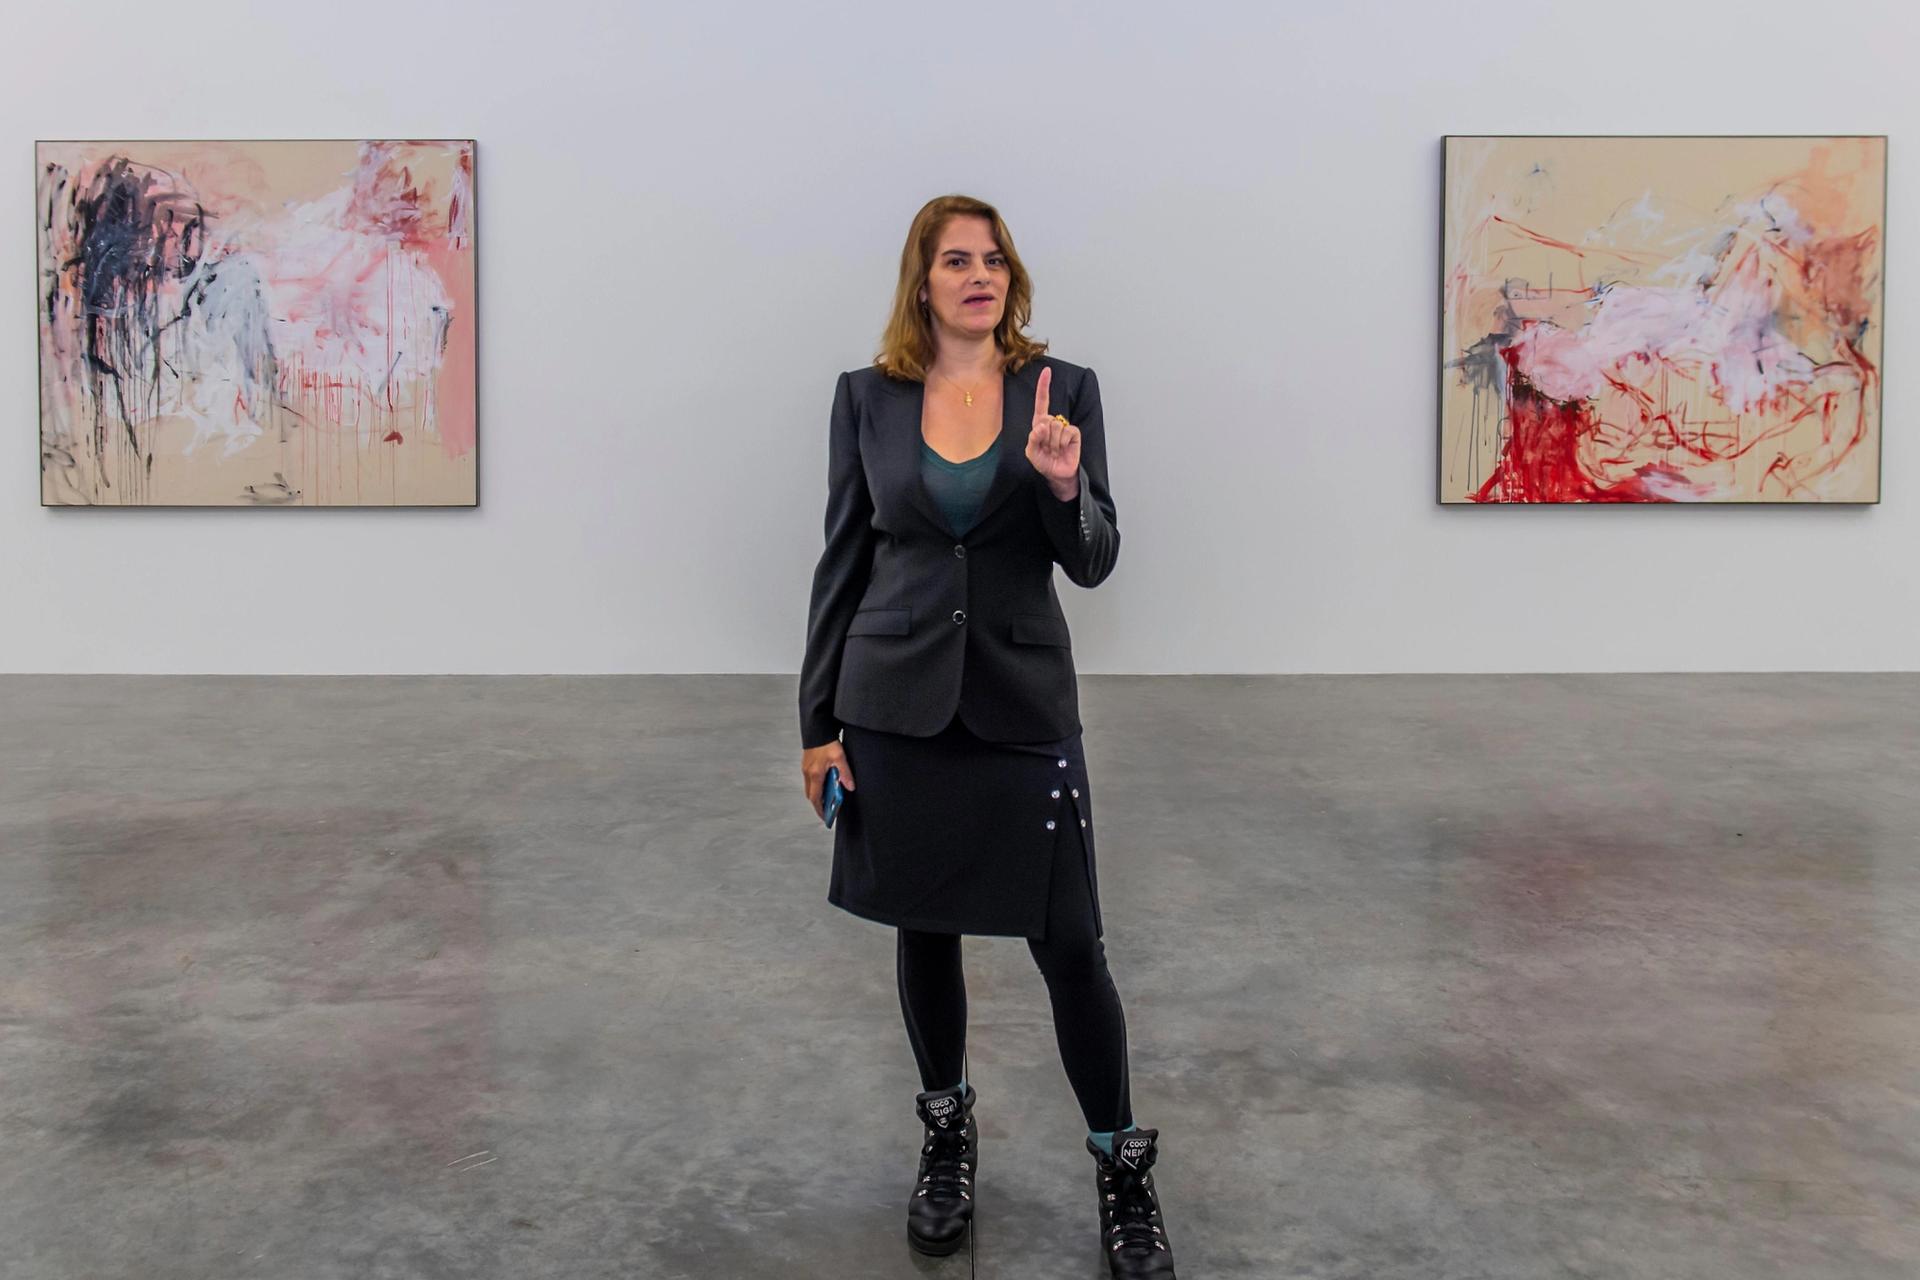 Tracey Emin says her non-profit foundation will establish a mini museum, artist studios, a sculpture park and a life-drawing club in her hometown of Margate, England. Photo: Guy Bell / Alamy Stock Photo